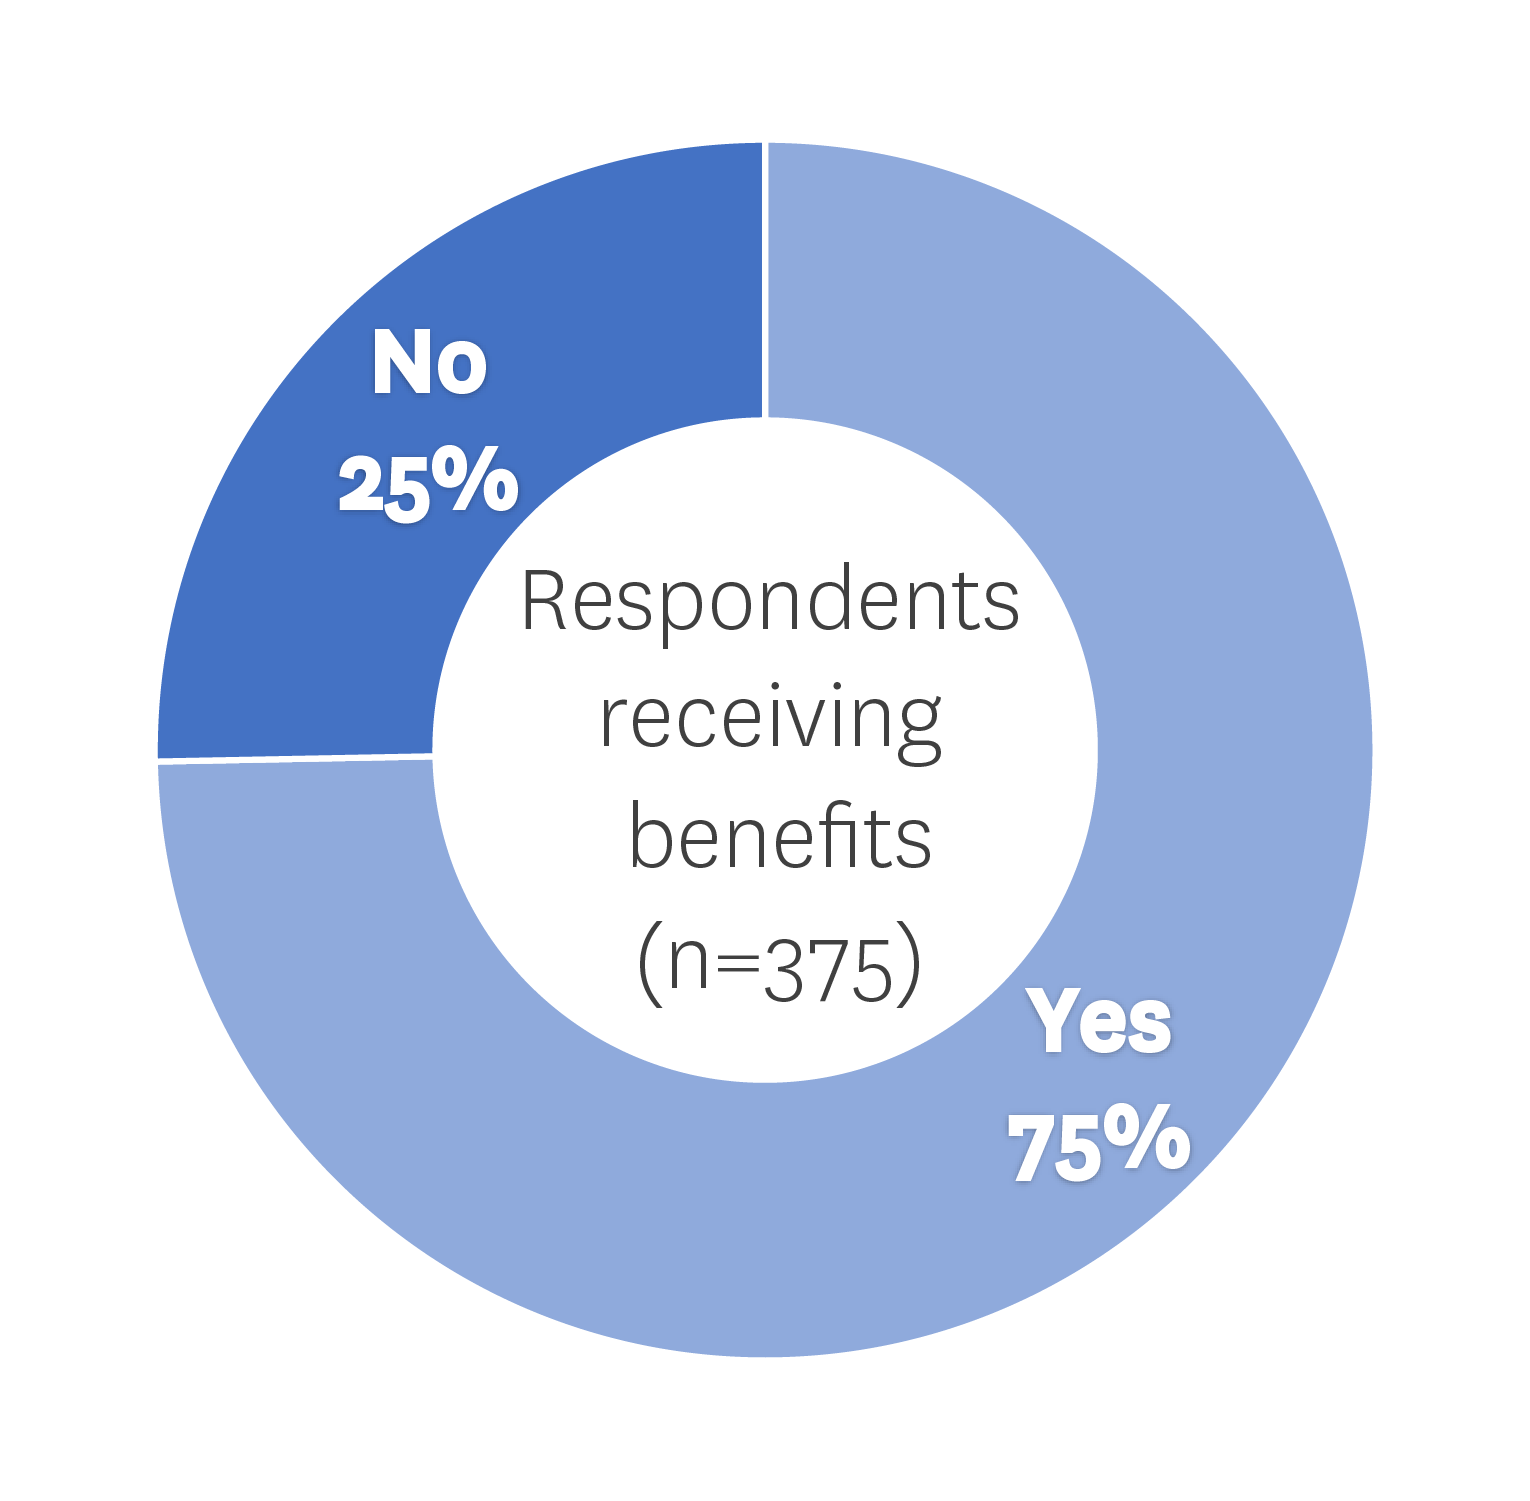 A pie chart showing 75% of survey respondents who receive benefits needing childcare for most of the day